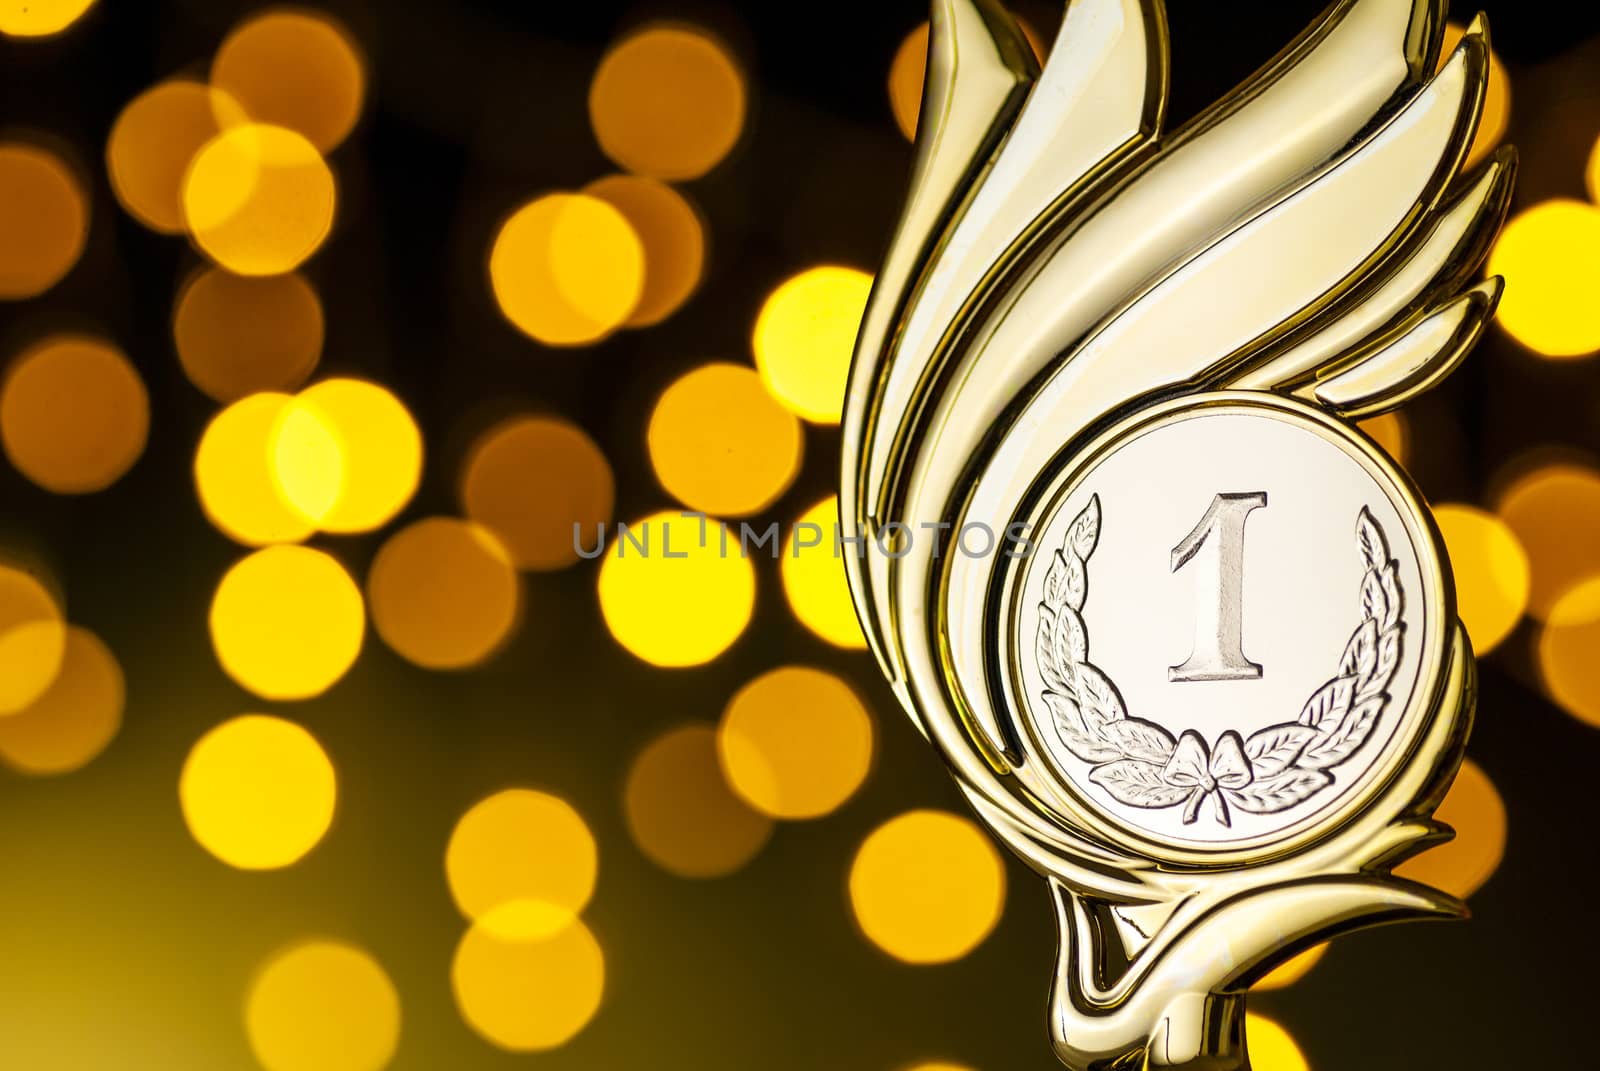 Gold award trophy for the winner of a competition or championship event with flaming medallion over a yellow party bokeh effect of golden light